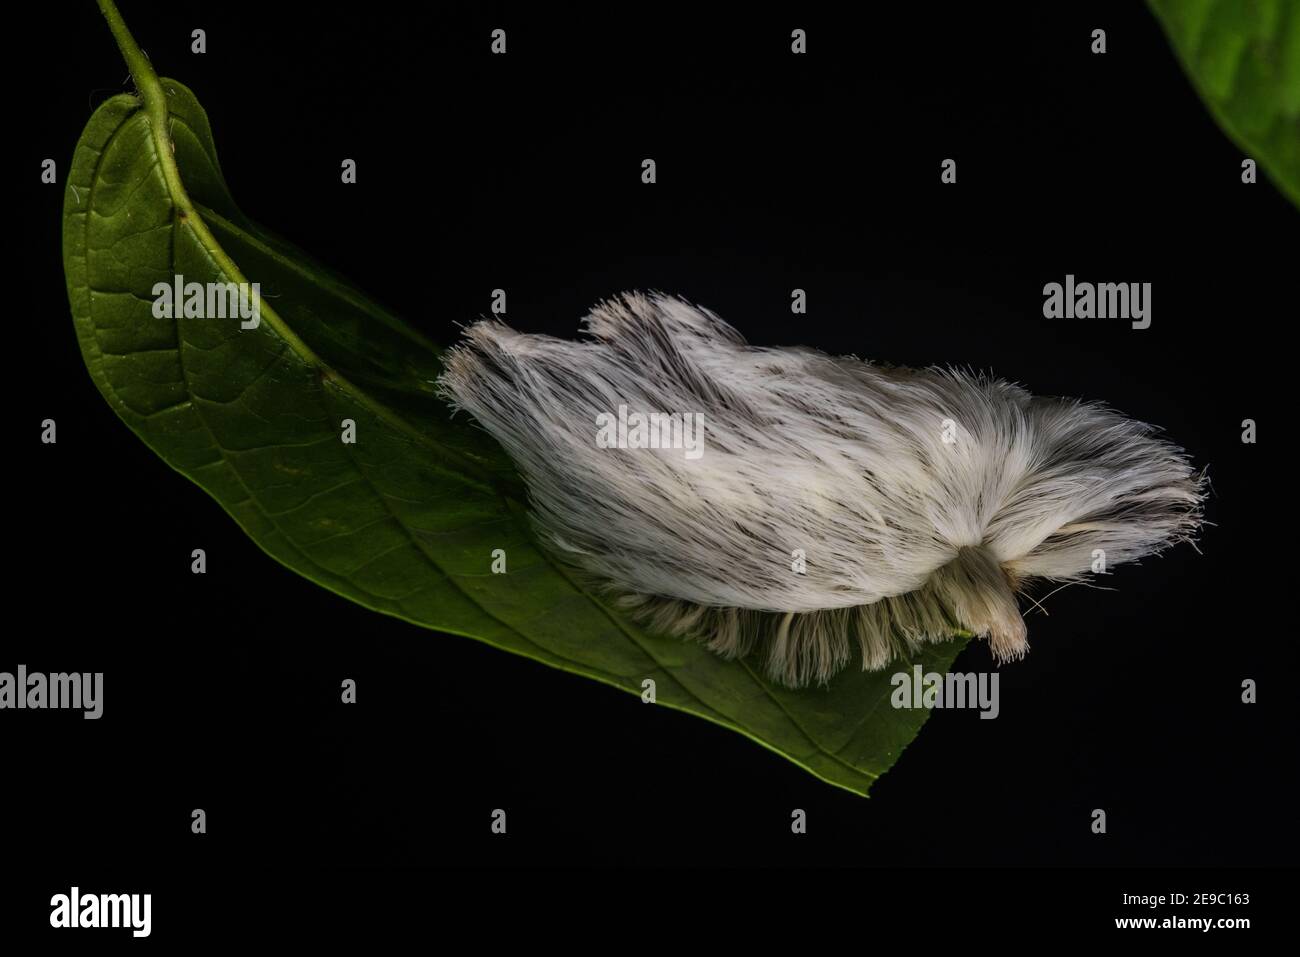 A flannel moth caterpillar from Peru, this insect is famous for resembling Trump's toupee. Stock Photo